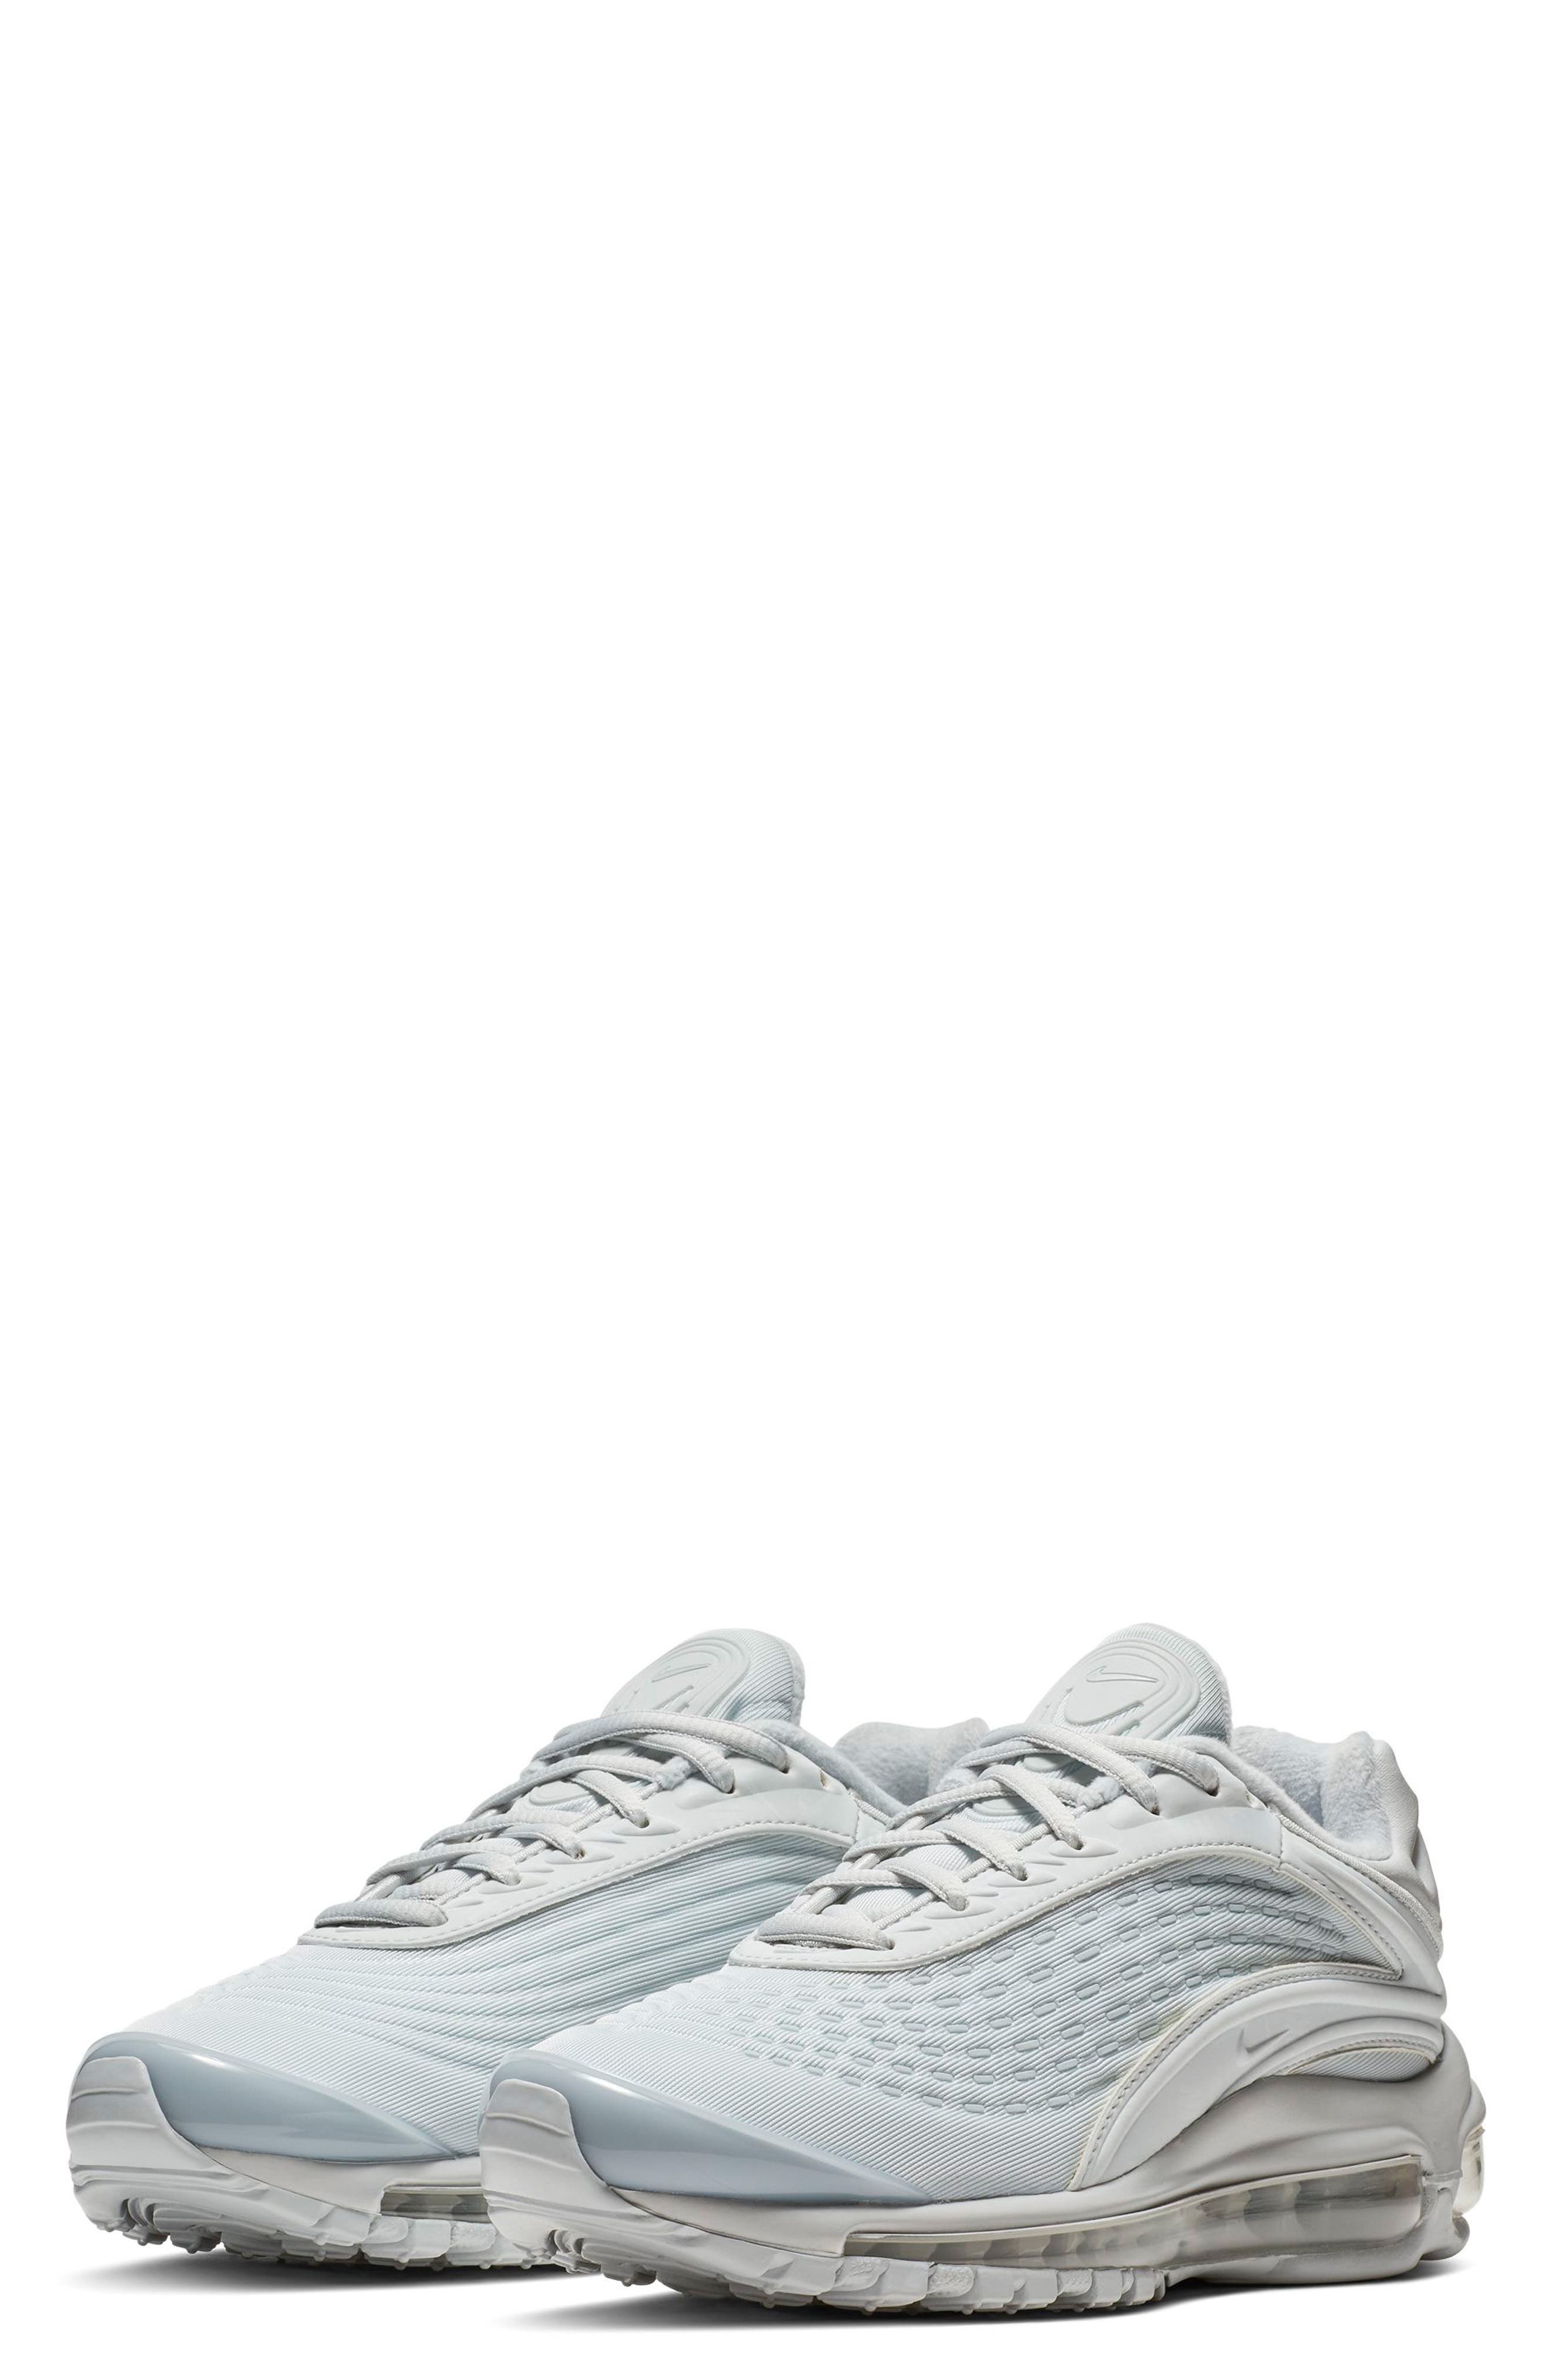 nike air max deluxe se women's